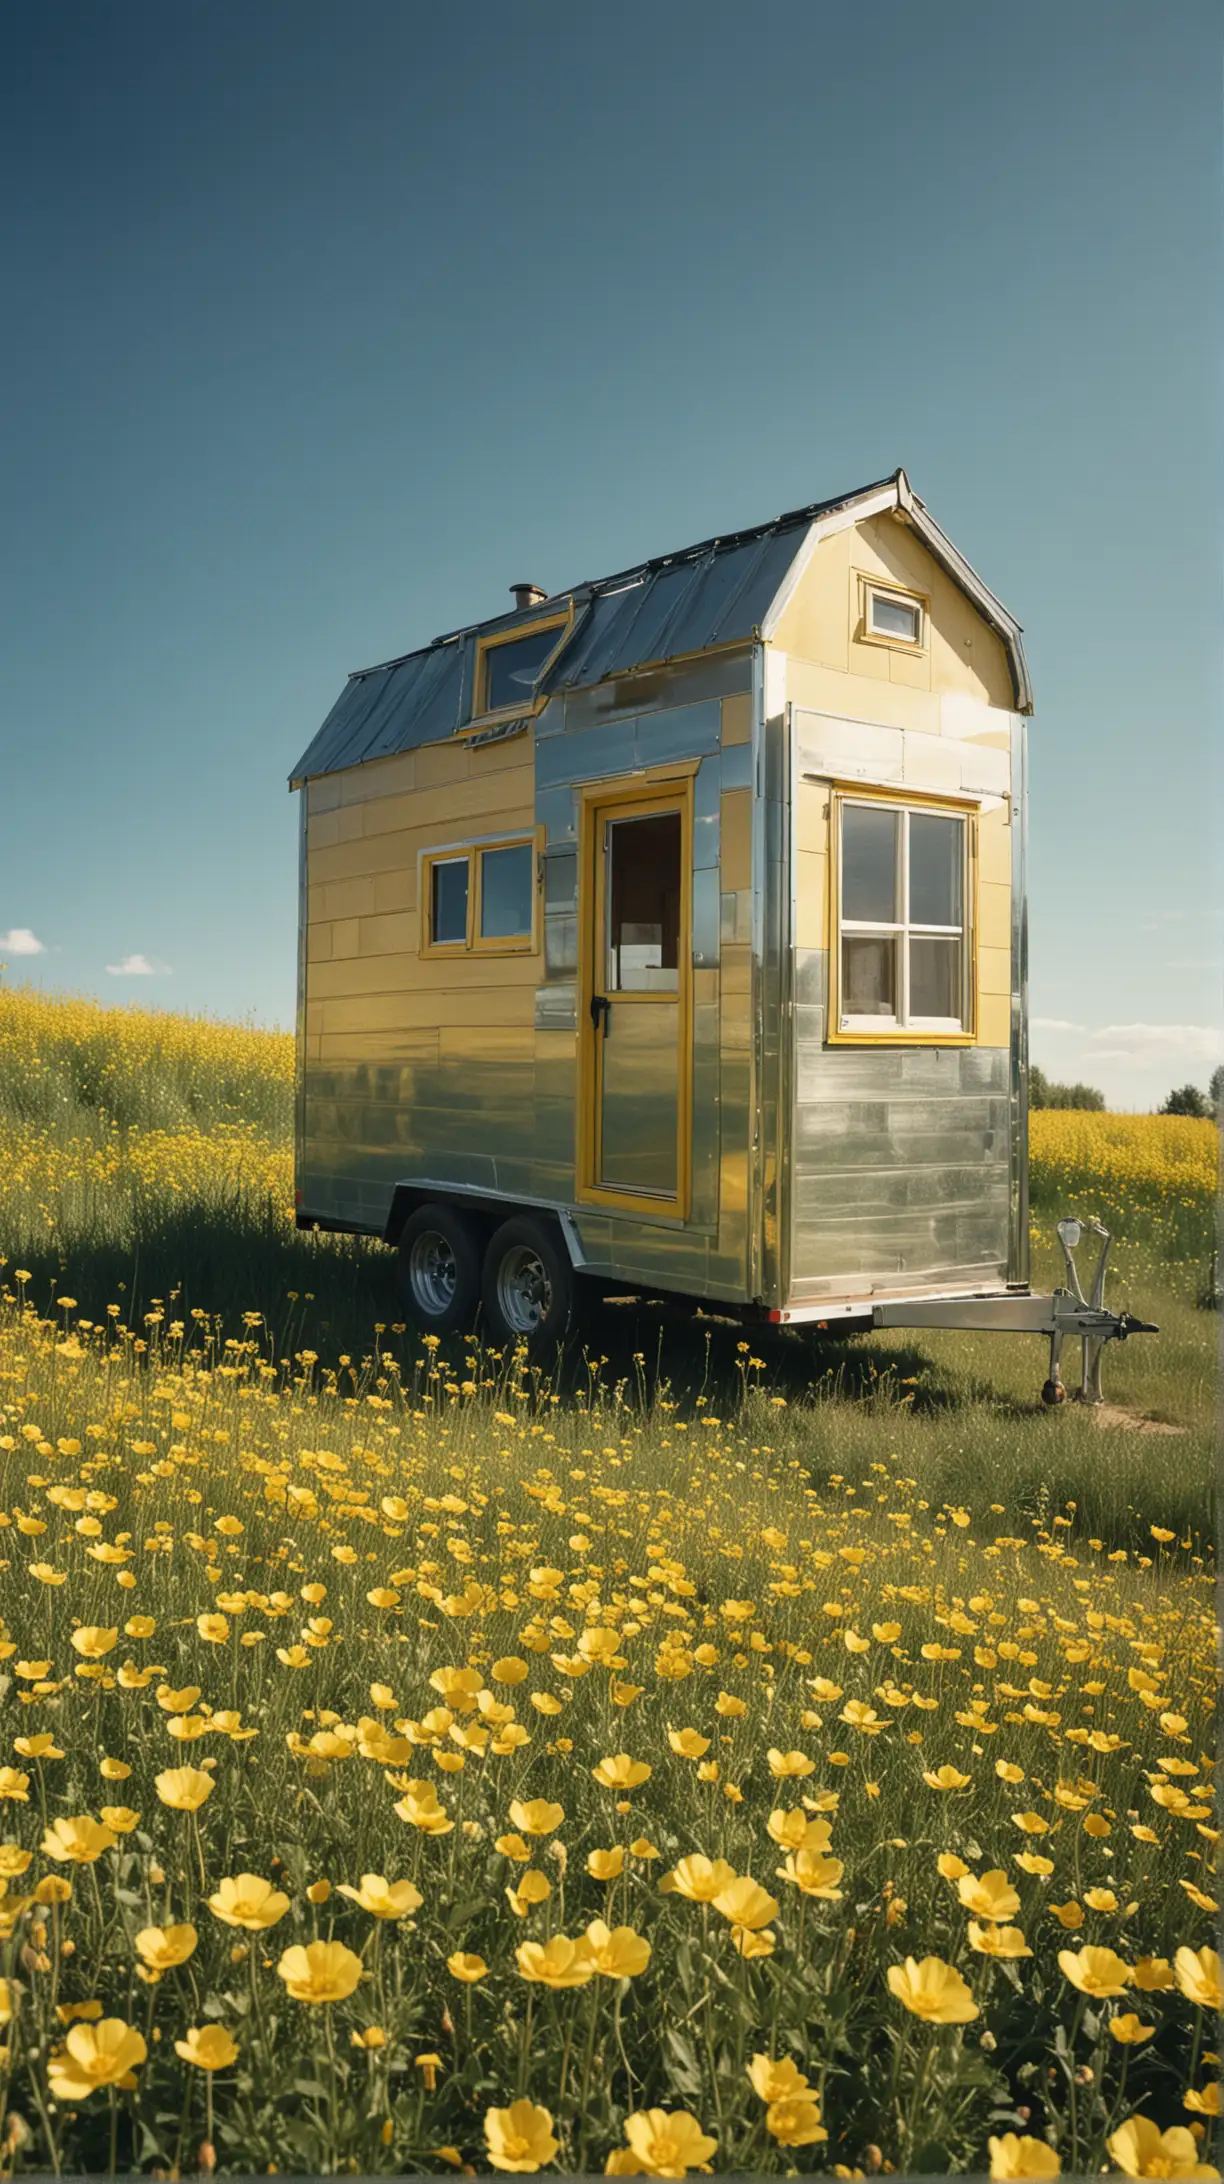 tiny house made in chrome, standing in a field of yellow flowers, blue sky, photography taken with an old camera lika Hasselblad 500c, picture taken with filmroll Portra 400, with some grain, ultra realistic photography